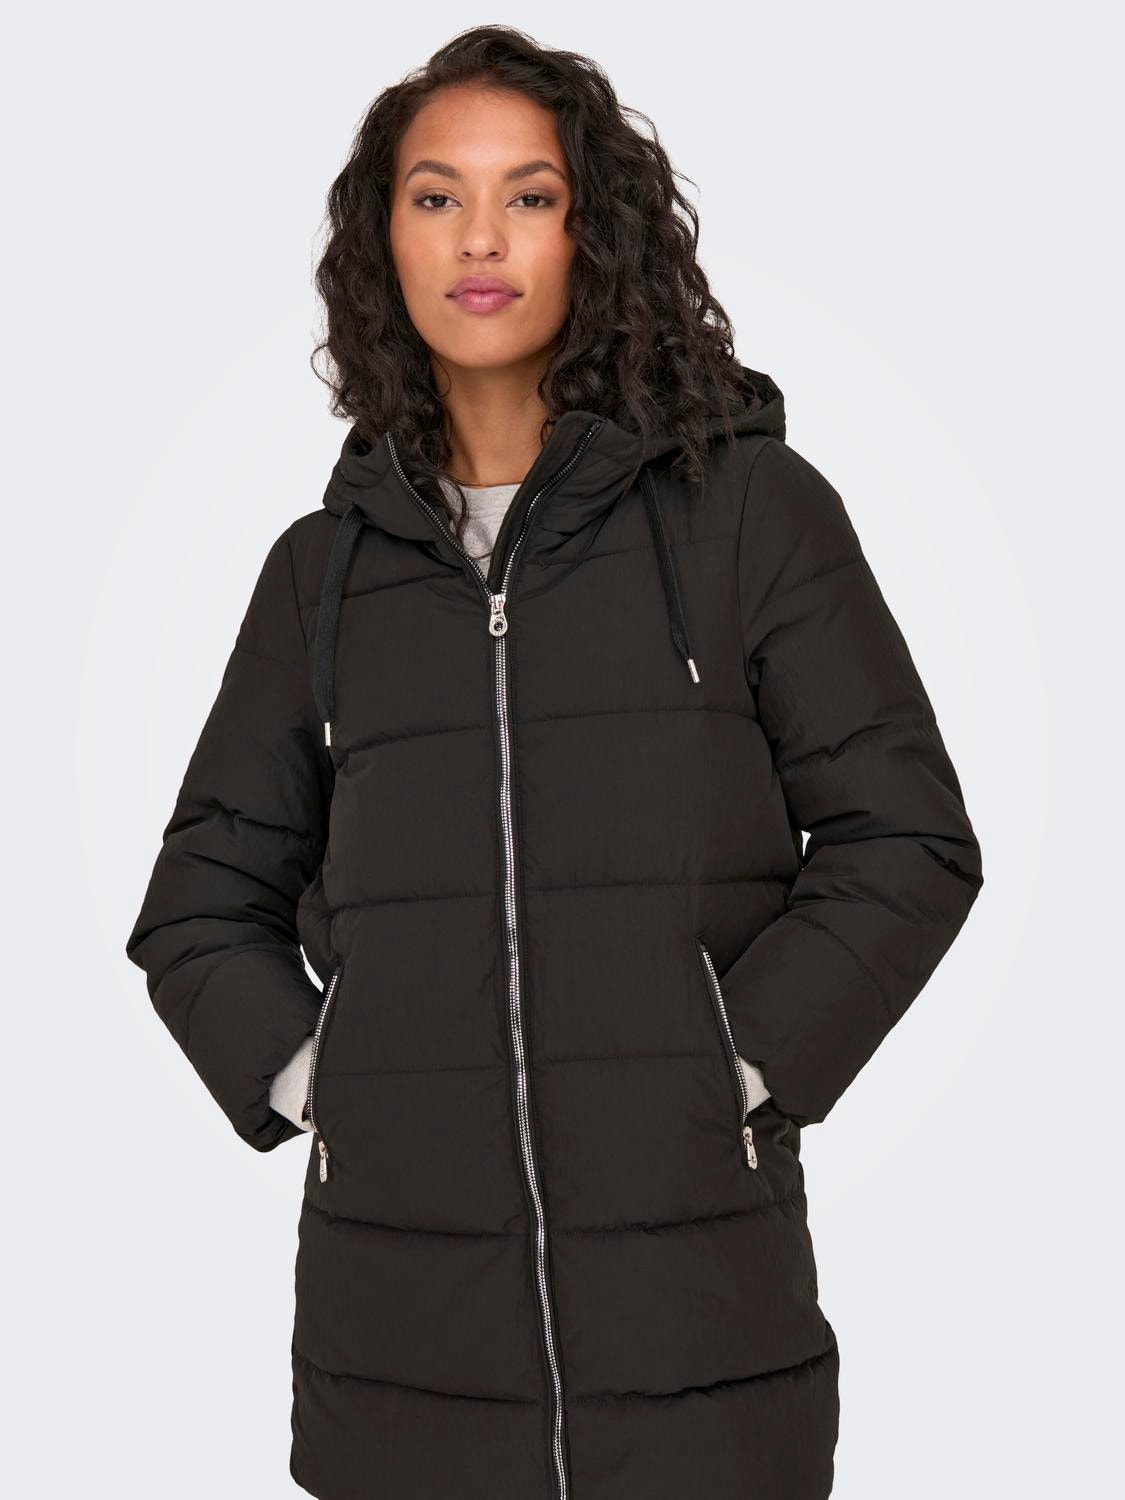 Long Puffer Jacket with 40% discount!